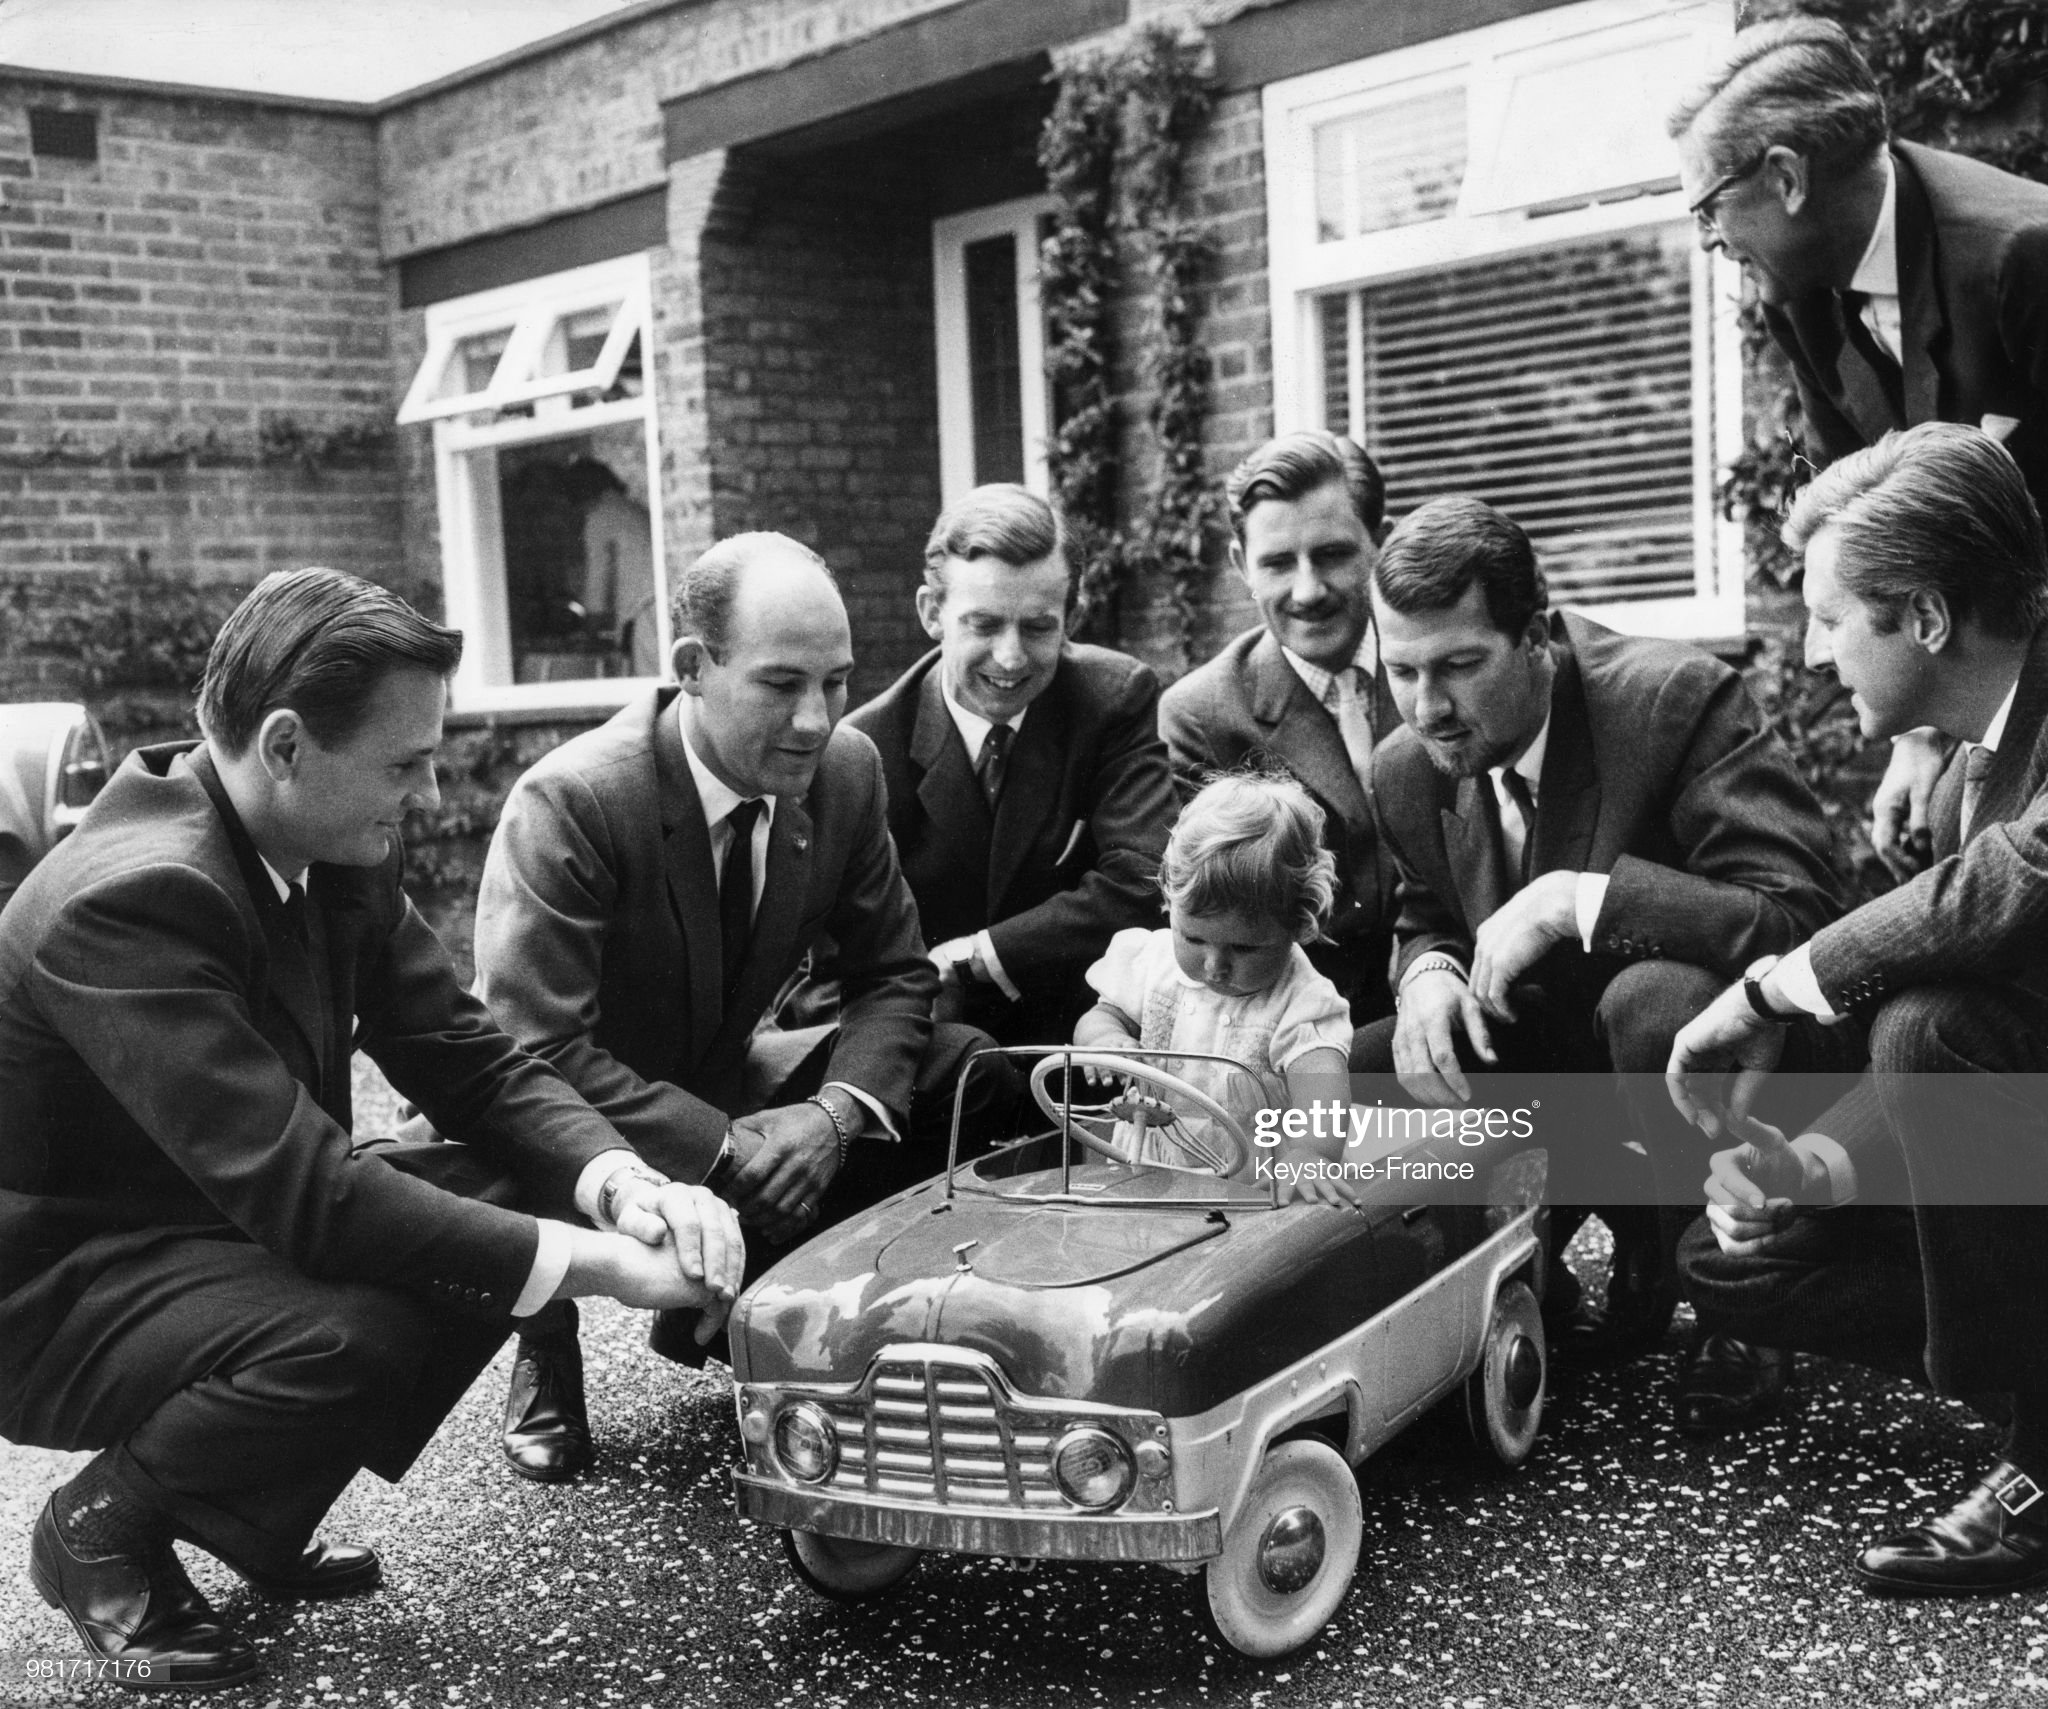 Damon Hill, 10 months old, on the day of his baptism driving a miniature car surrounded by Bruce McLaren, Stirling Moss, Tony Brooks, Graham Hill, Joakim Bonnier and Wolfgang von Trips.